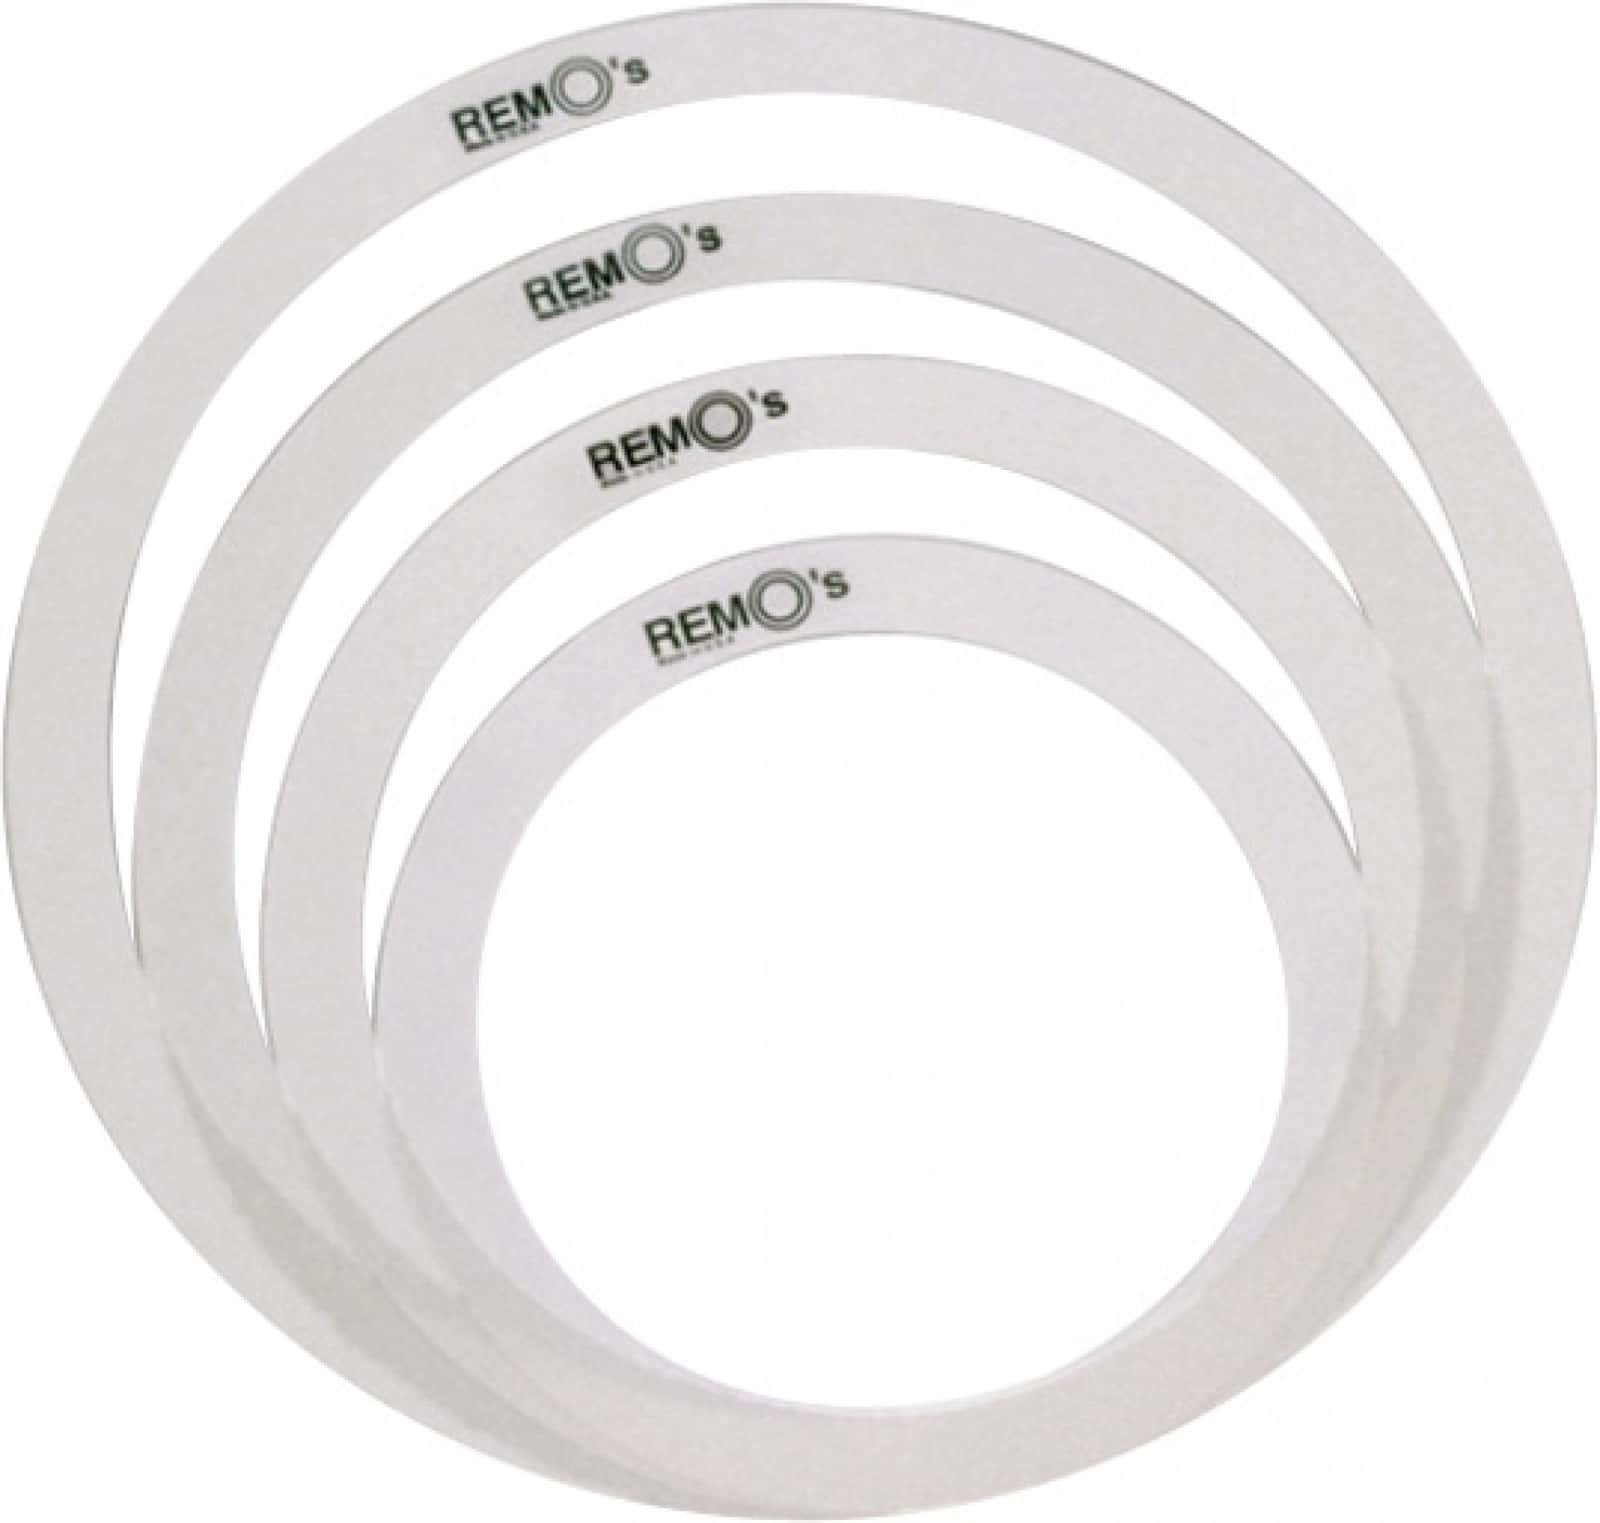 REMO RO-0244-00 - PACK SOURDINES MUFFLE RING TONE CONTROL 10/12/14/14 